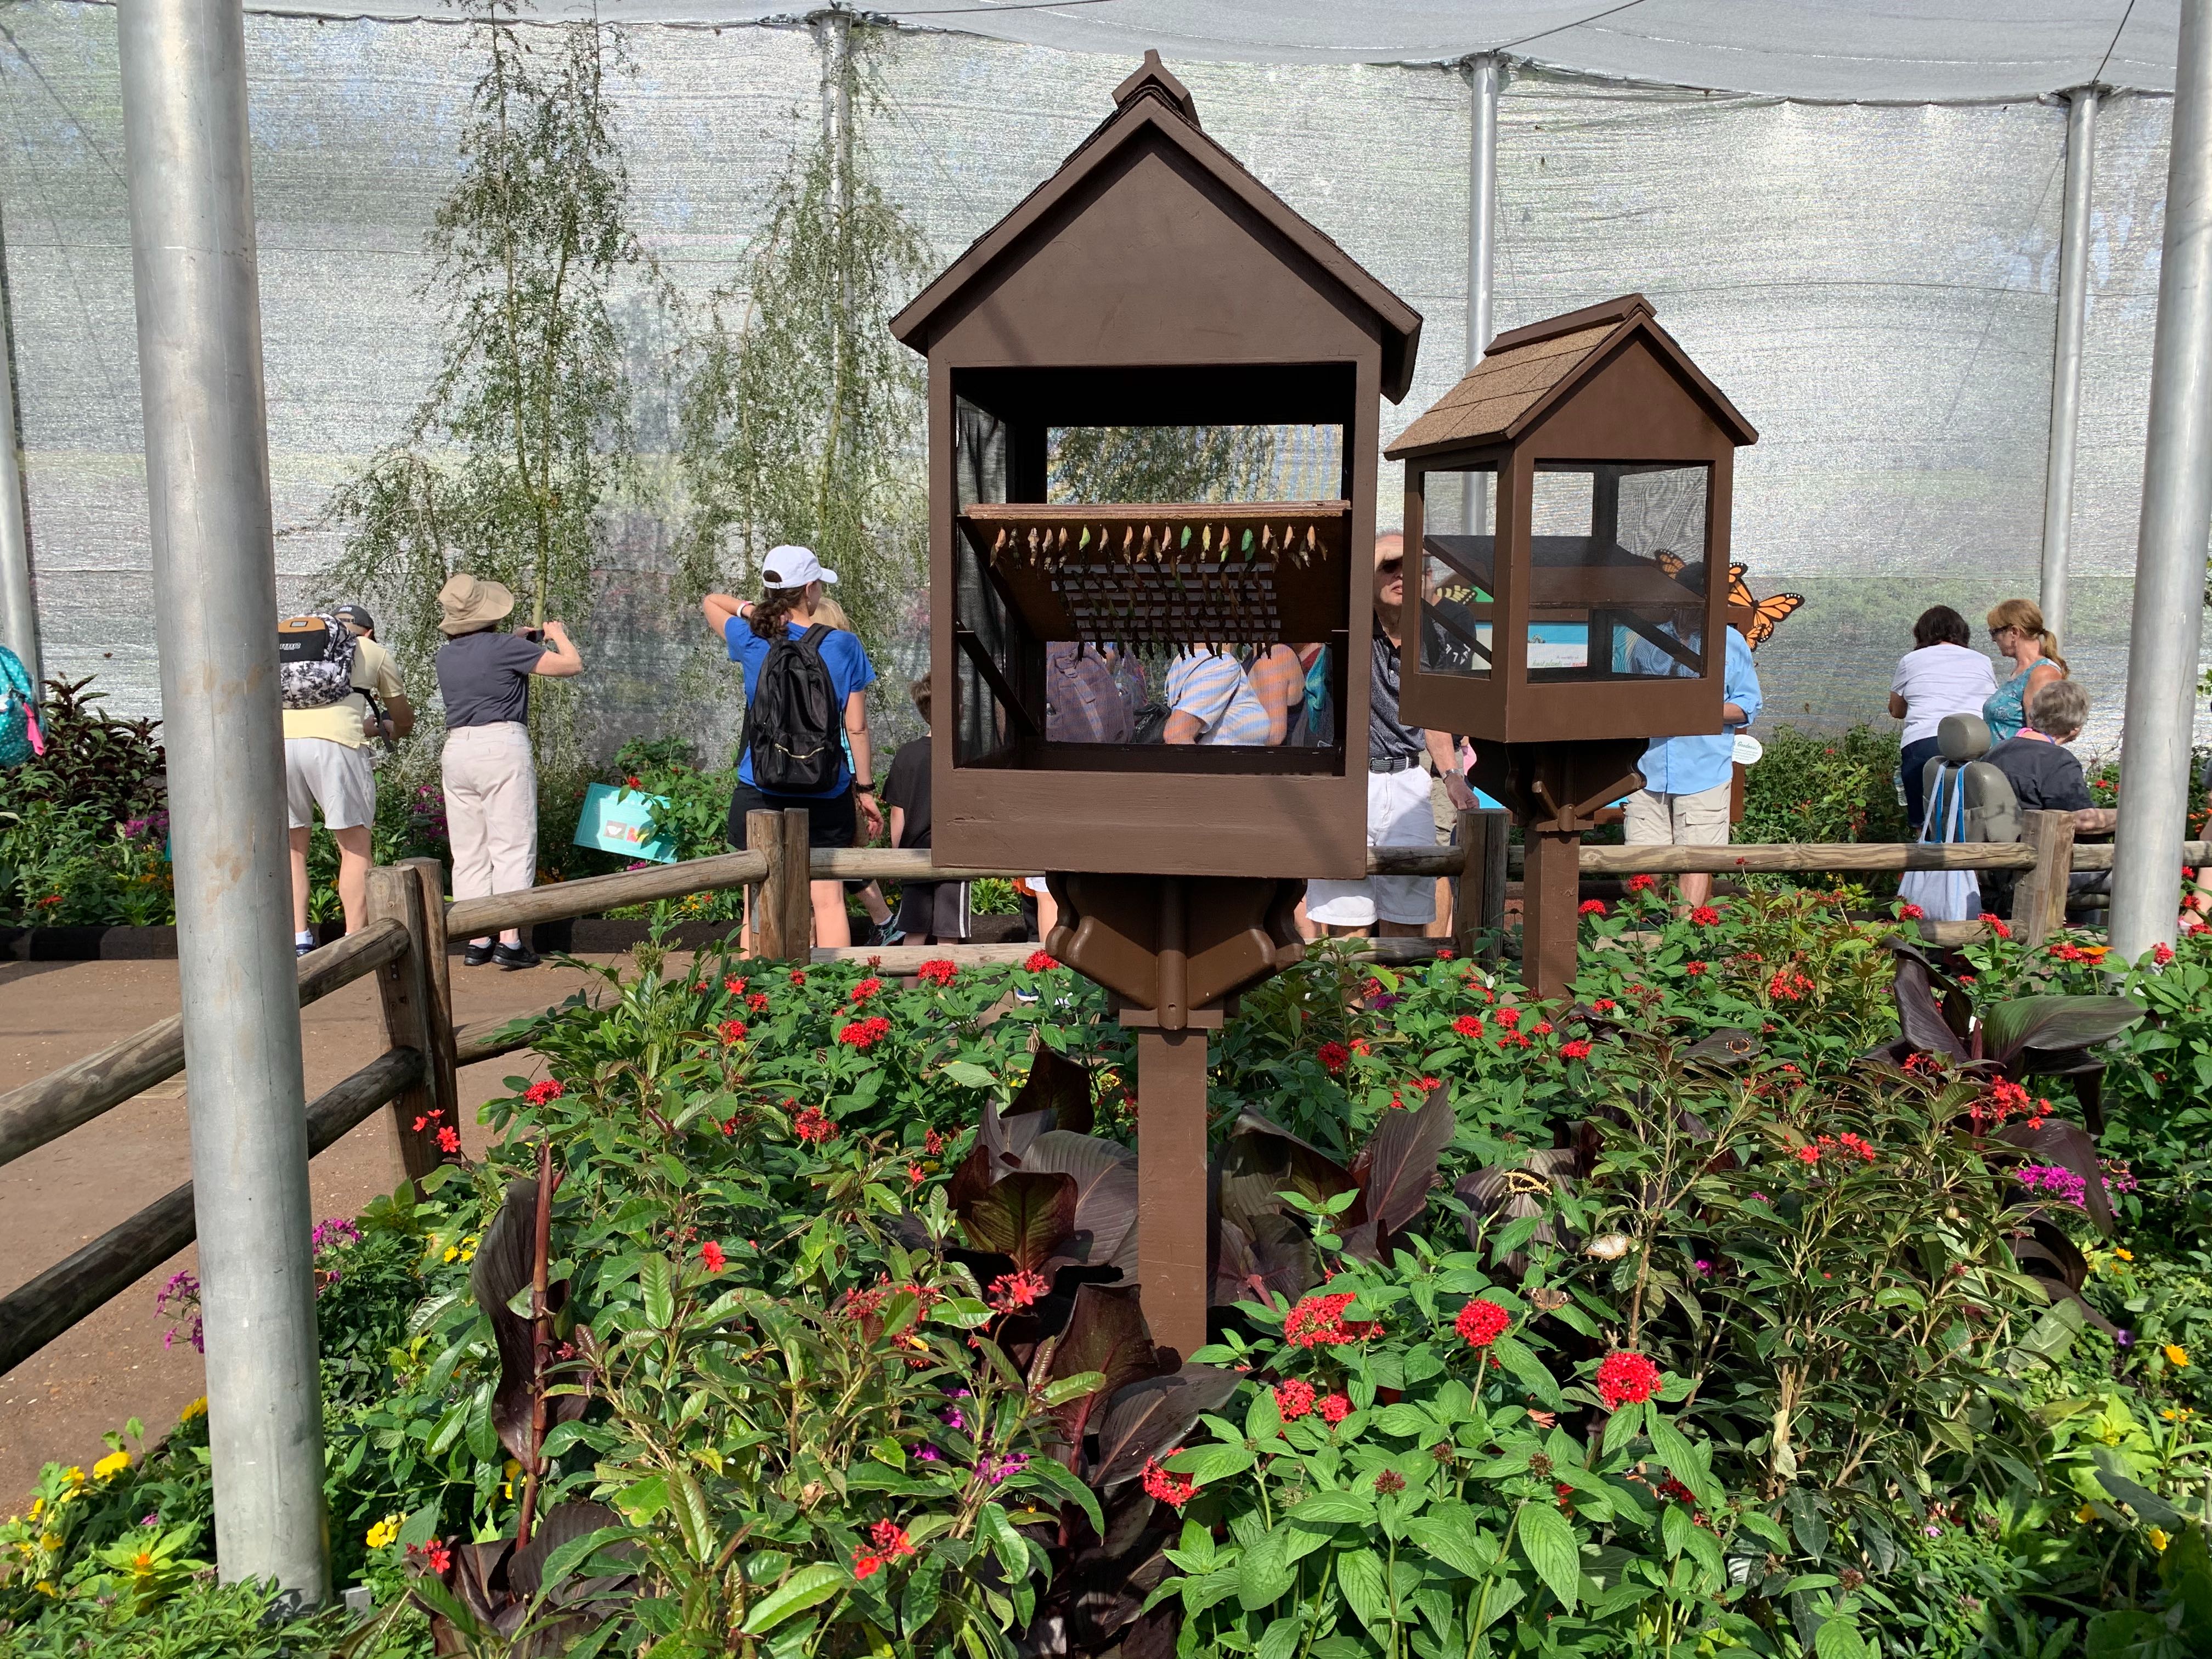 PHOTOS, VIDEO Tour The New Goodness Garden Butterfly House at the